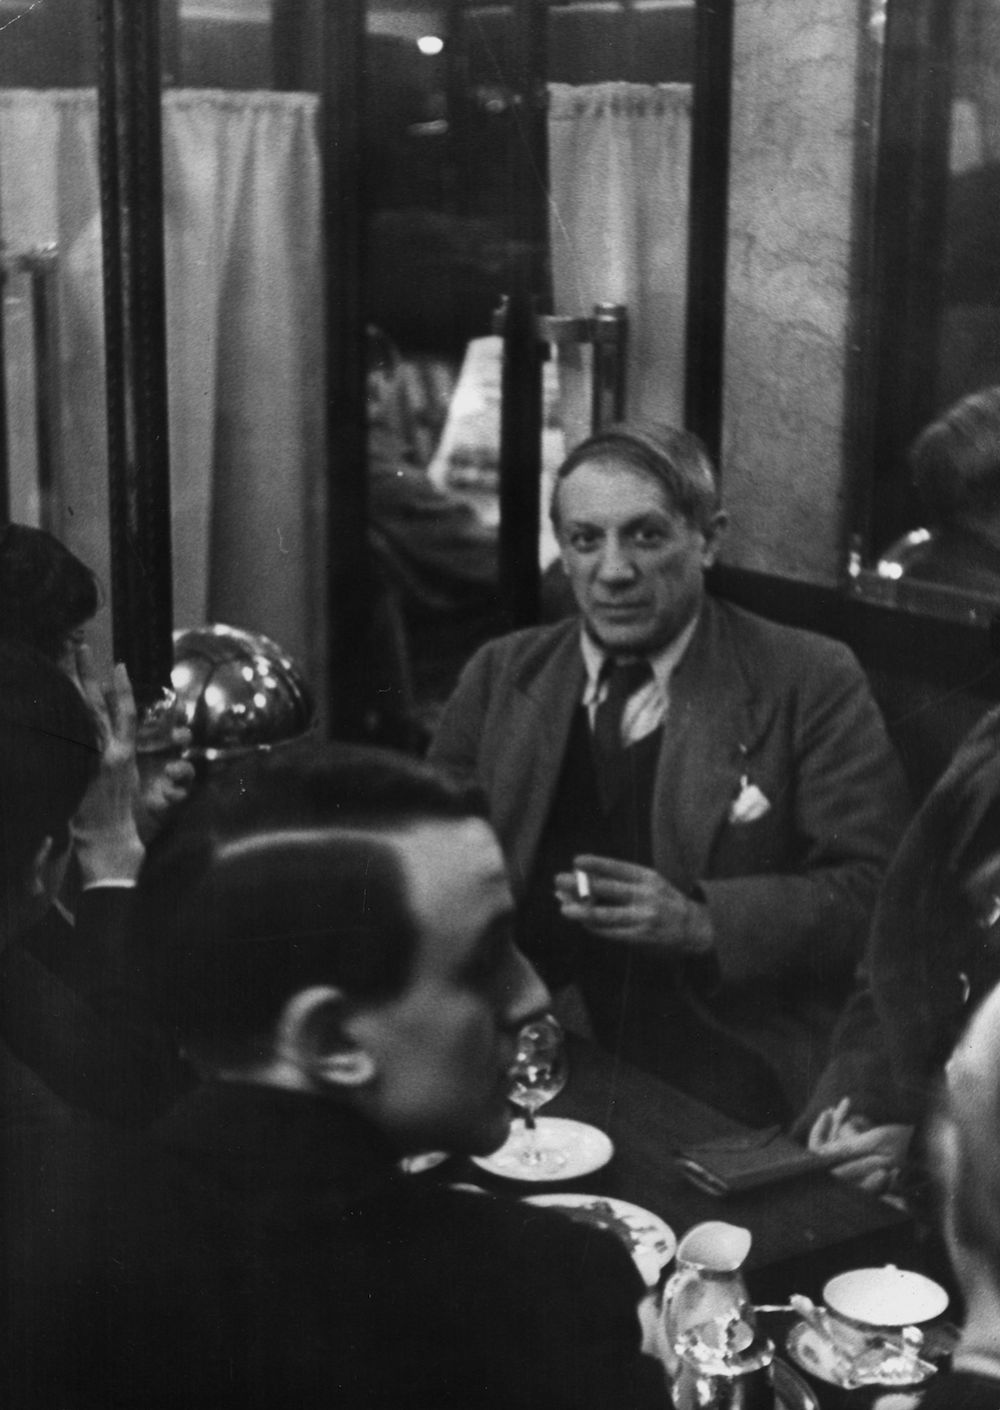 circa 1950: Spanish artist Pablo Picasso (1881 - 1973) drinking in a cafe in Paris. (Photo by Hulton Archive/Getty Images)